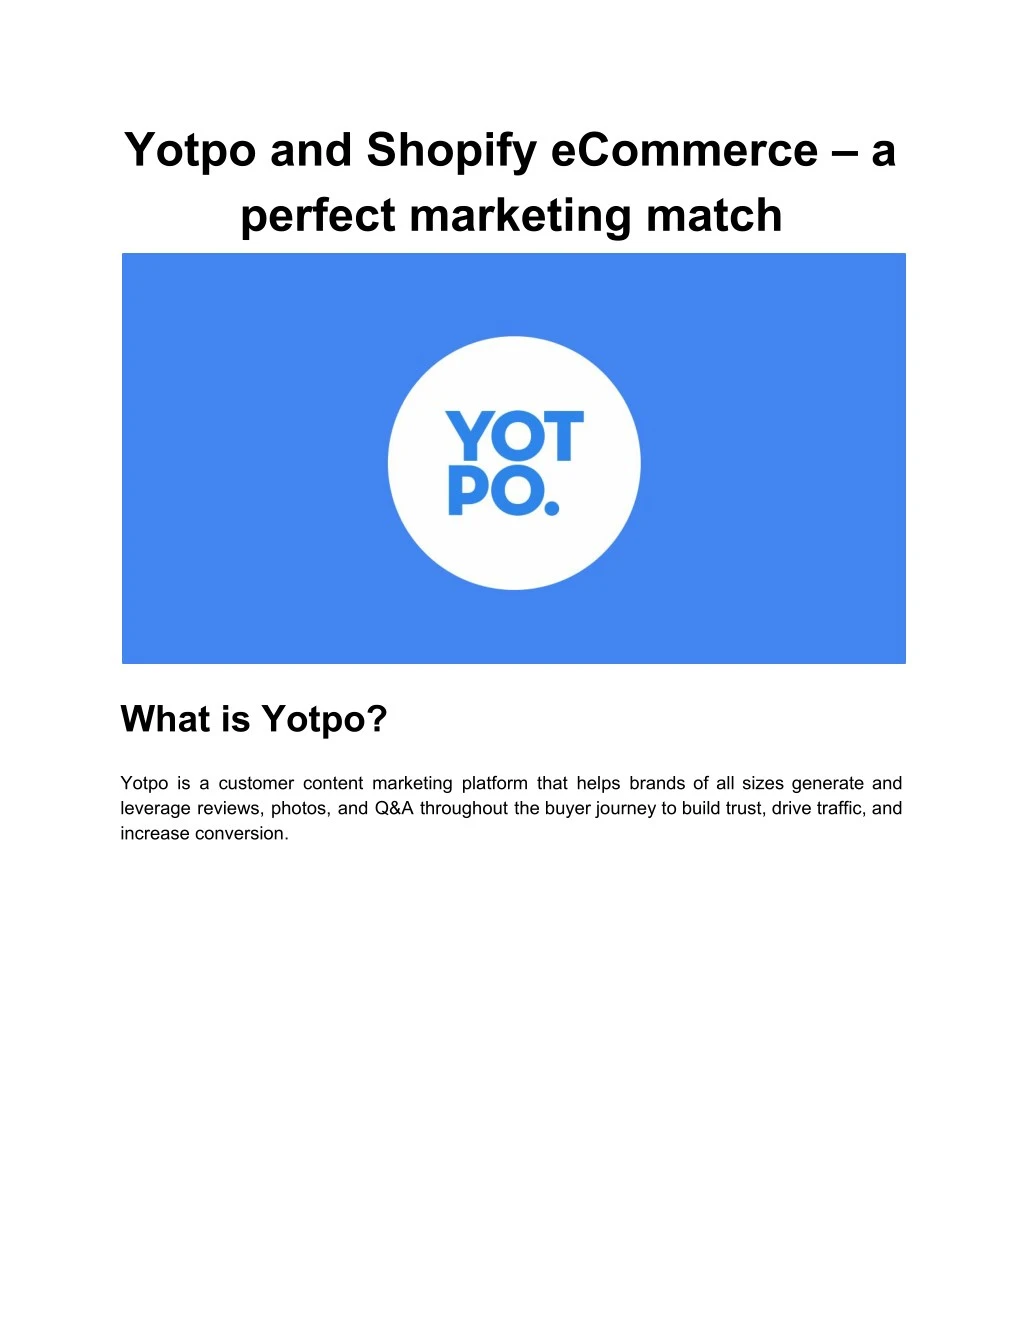 yotpo and shopify ecommerce a perfect marketing